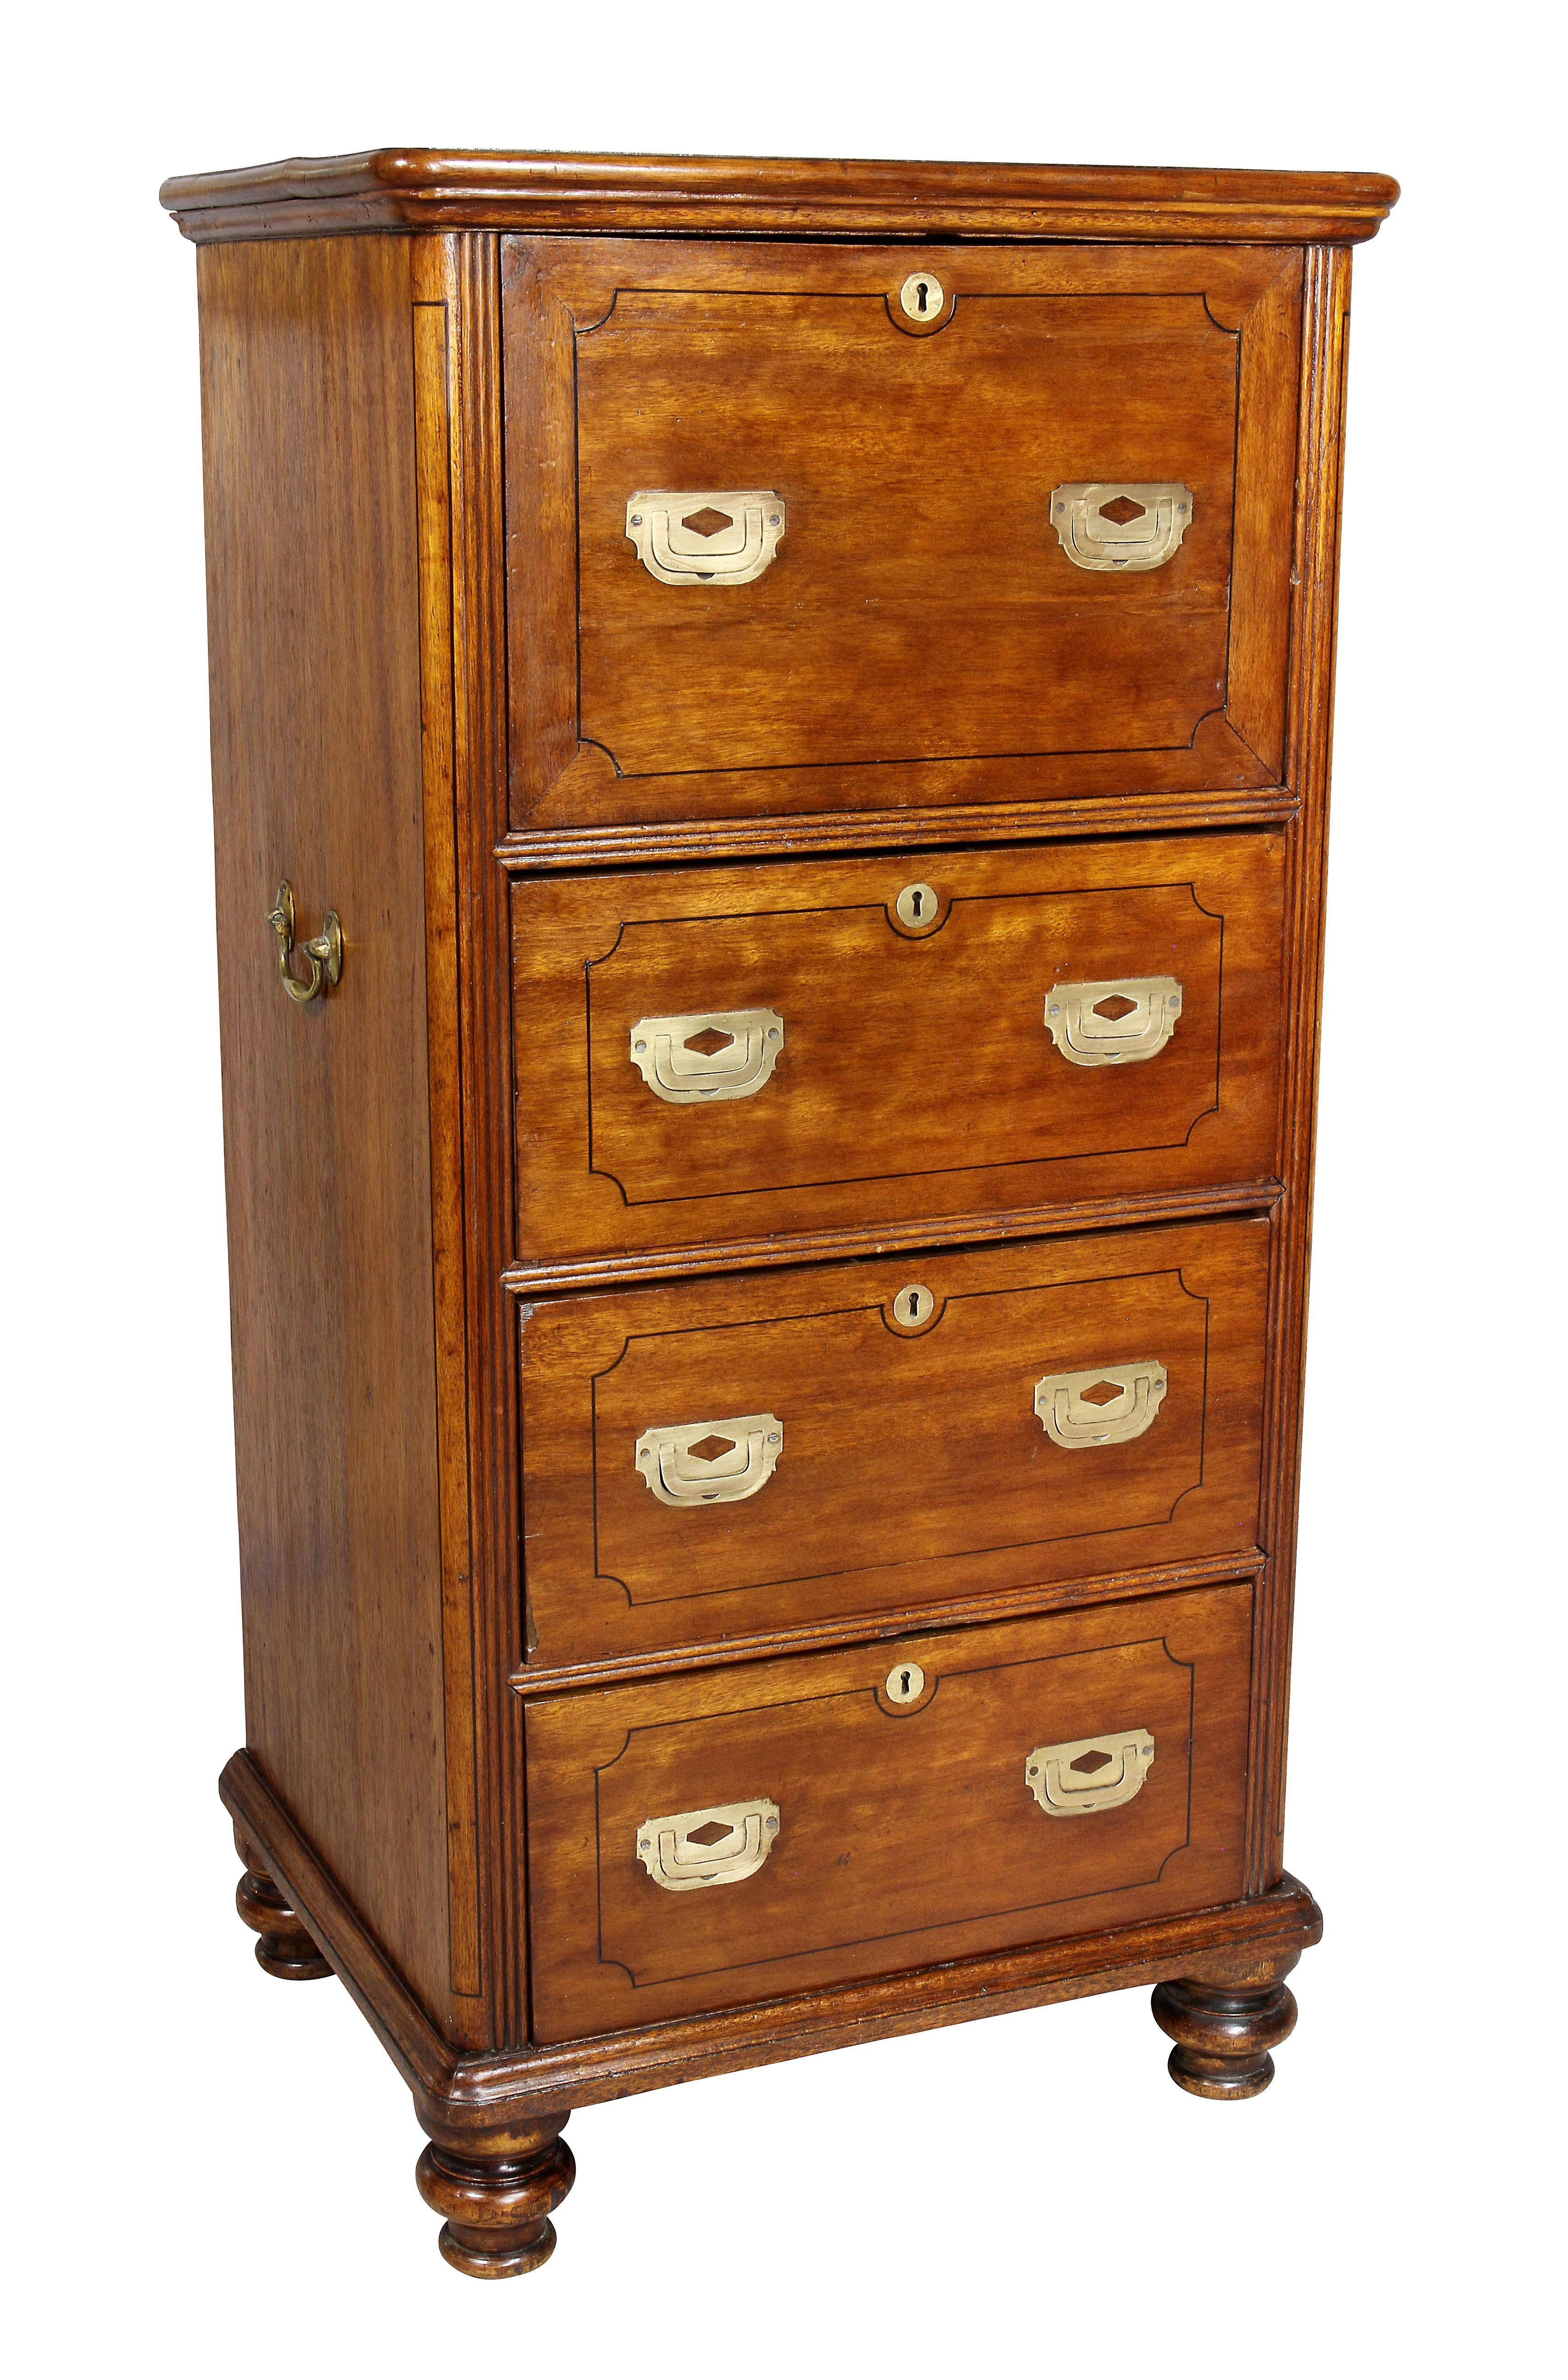 Unusual proportions with rectangular top and molded edge over a fold down desk over three drawers, turned toupie feet.